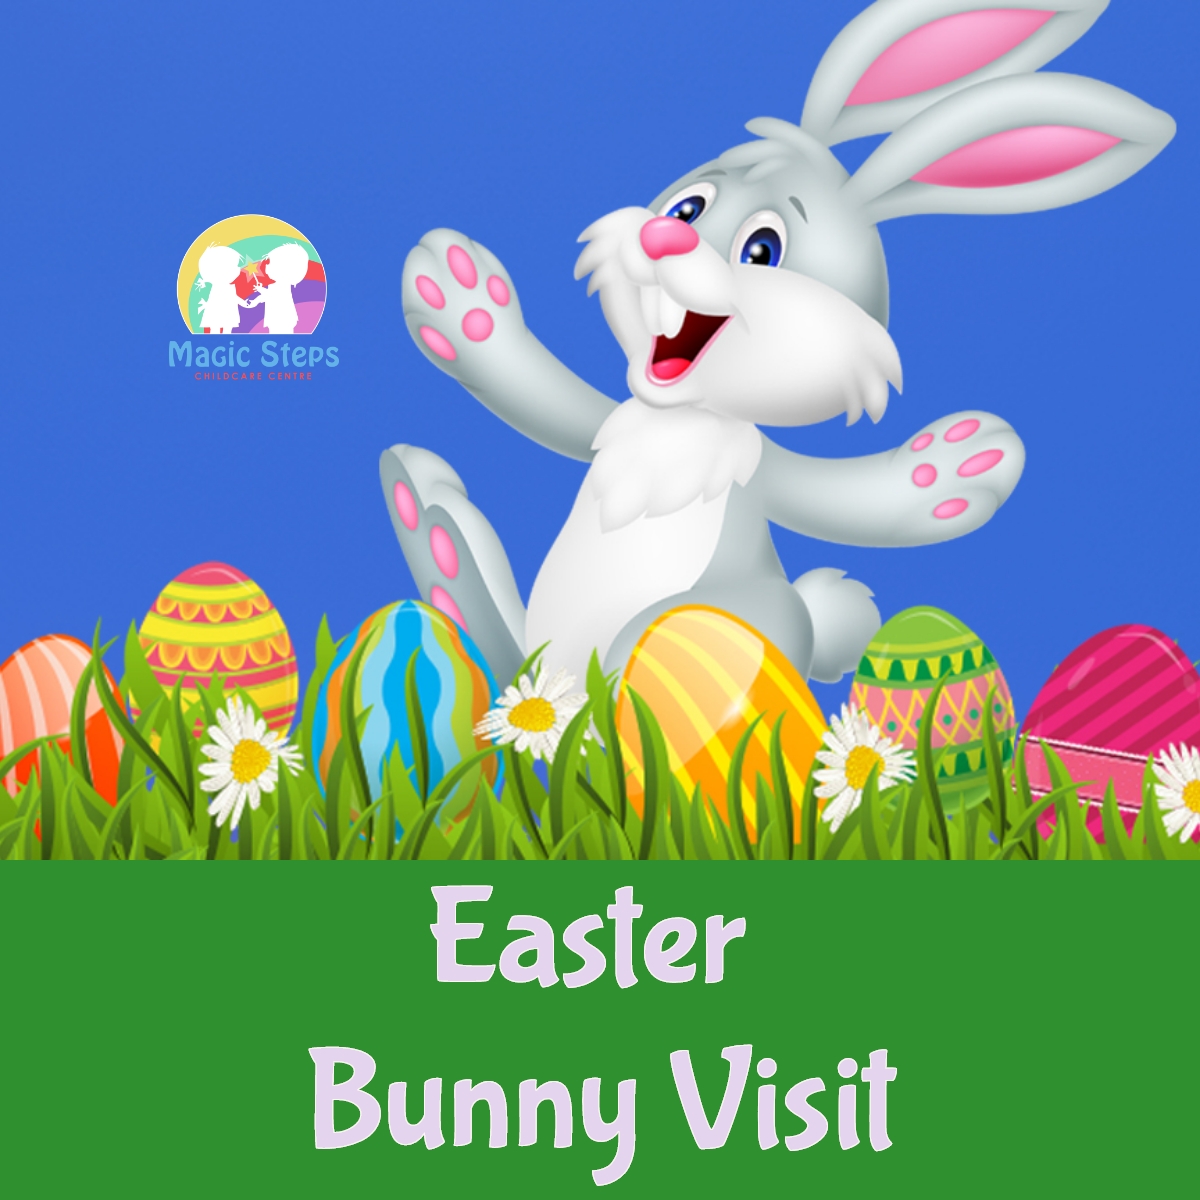 Easter Bunny Visit- Wednesday 13th April